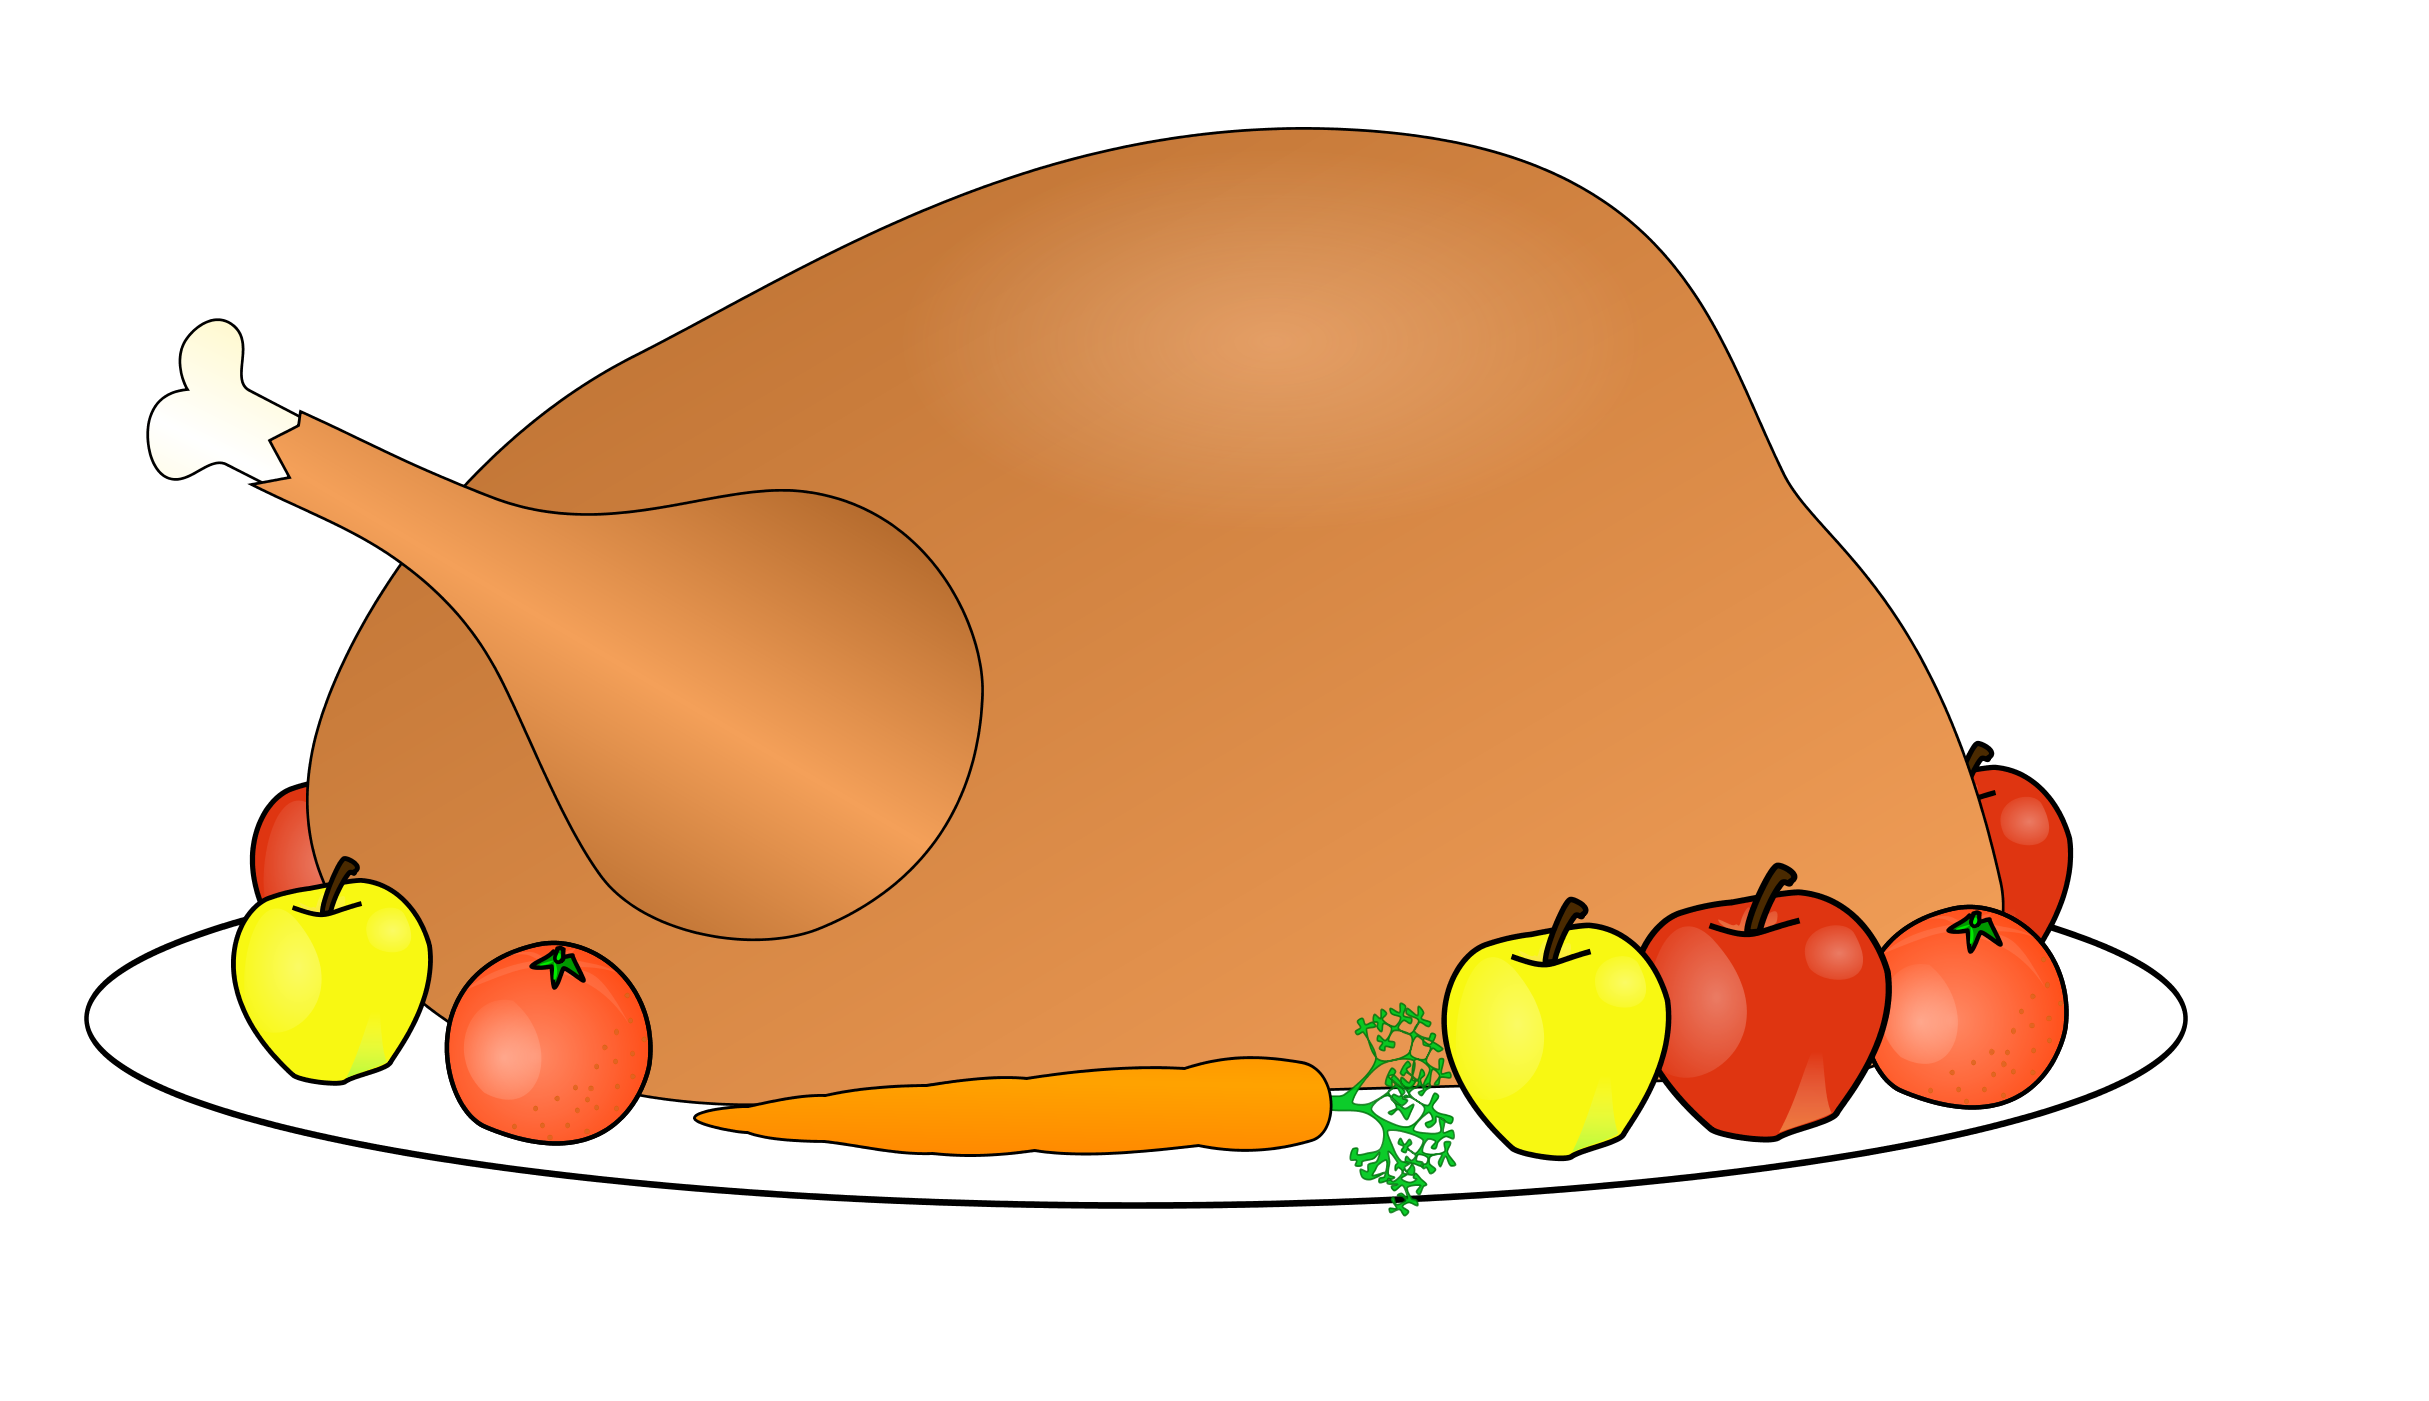 clip art free for thanksgiving - photo #23